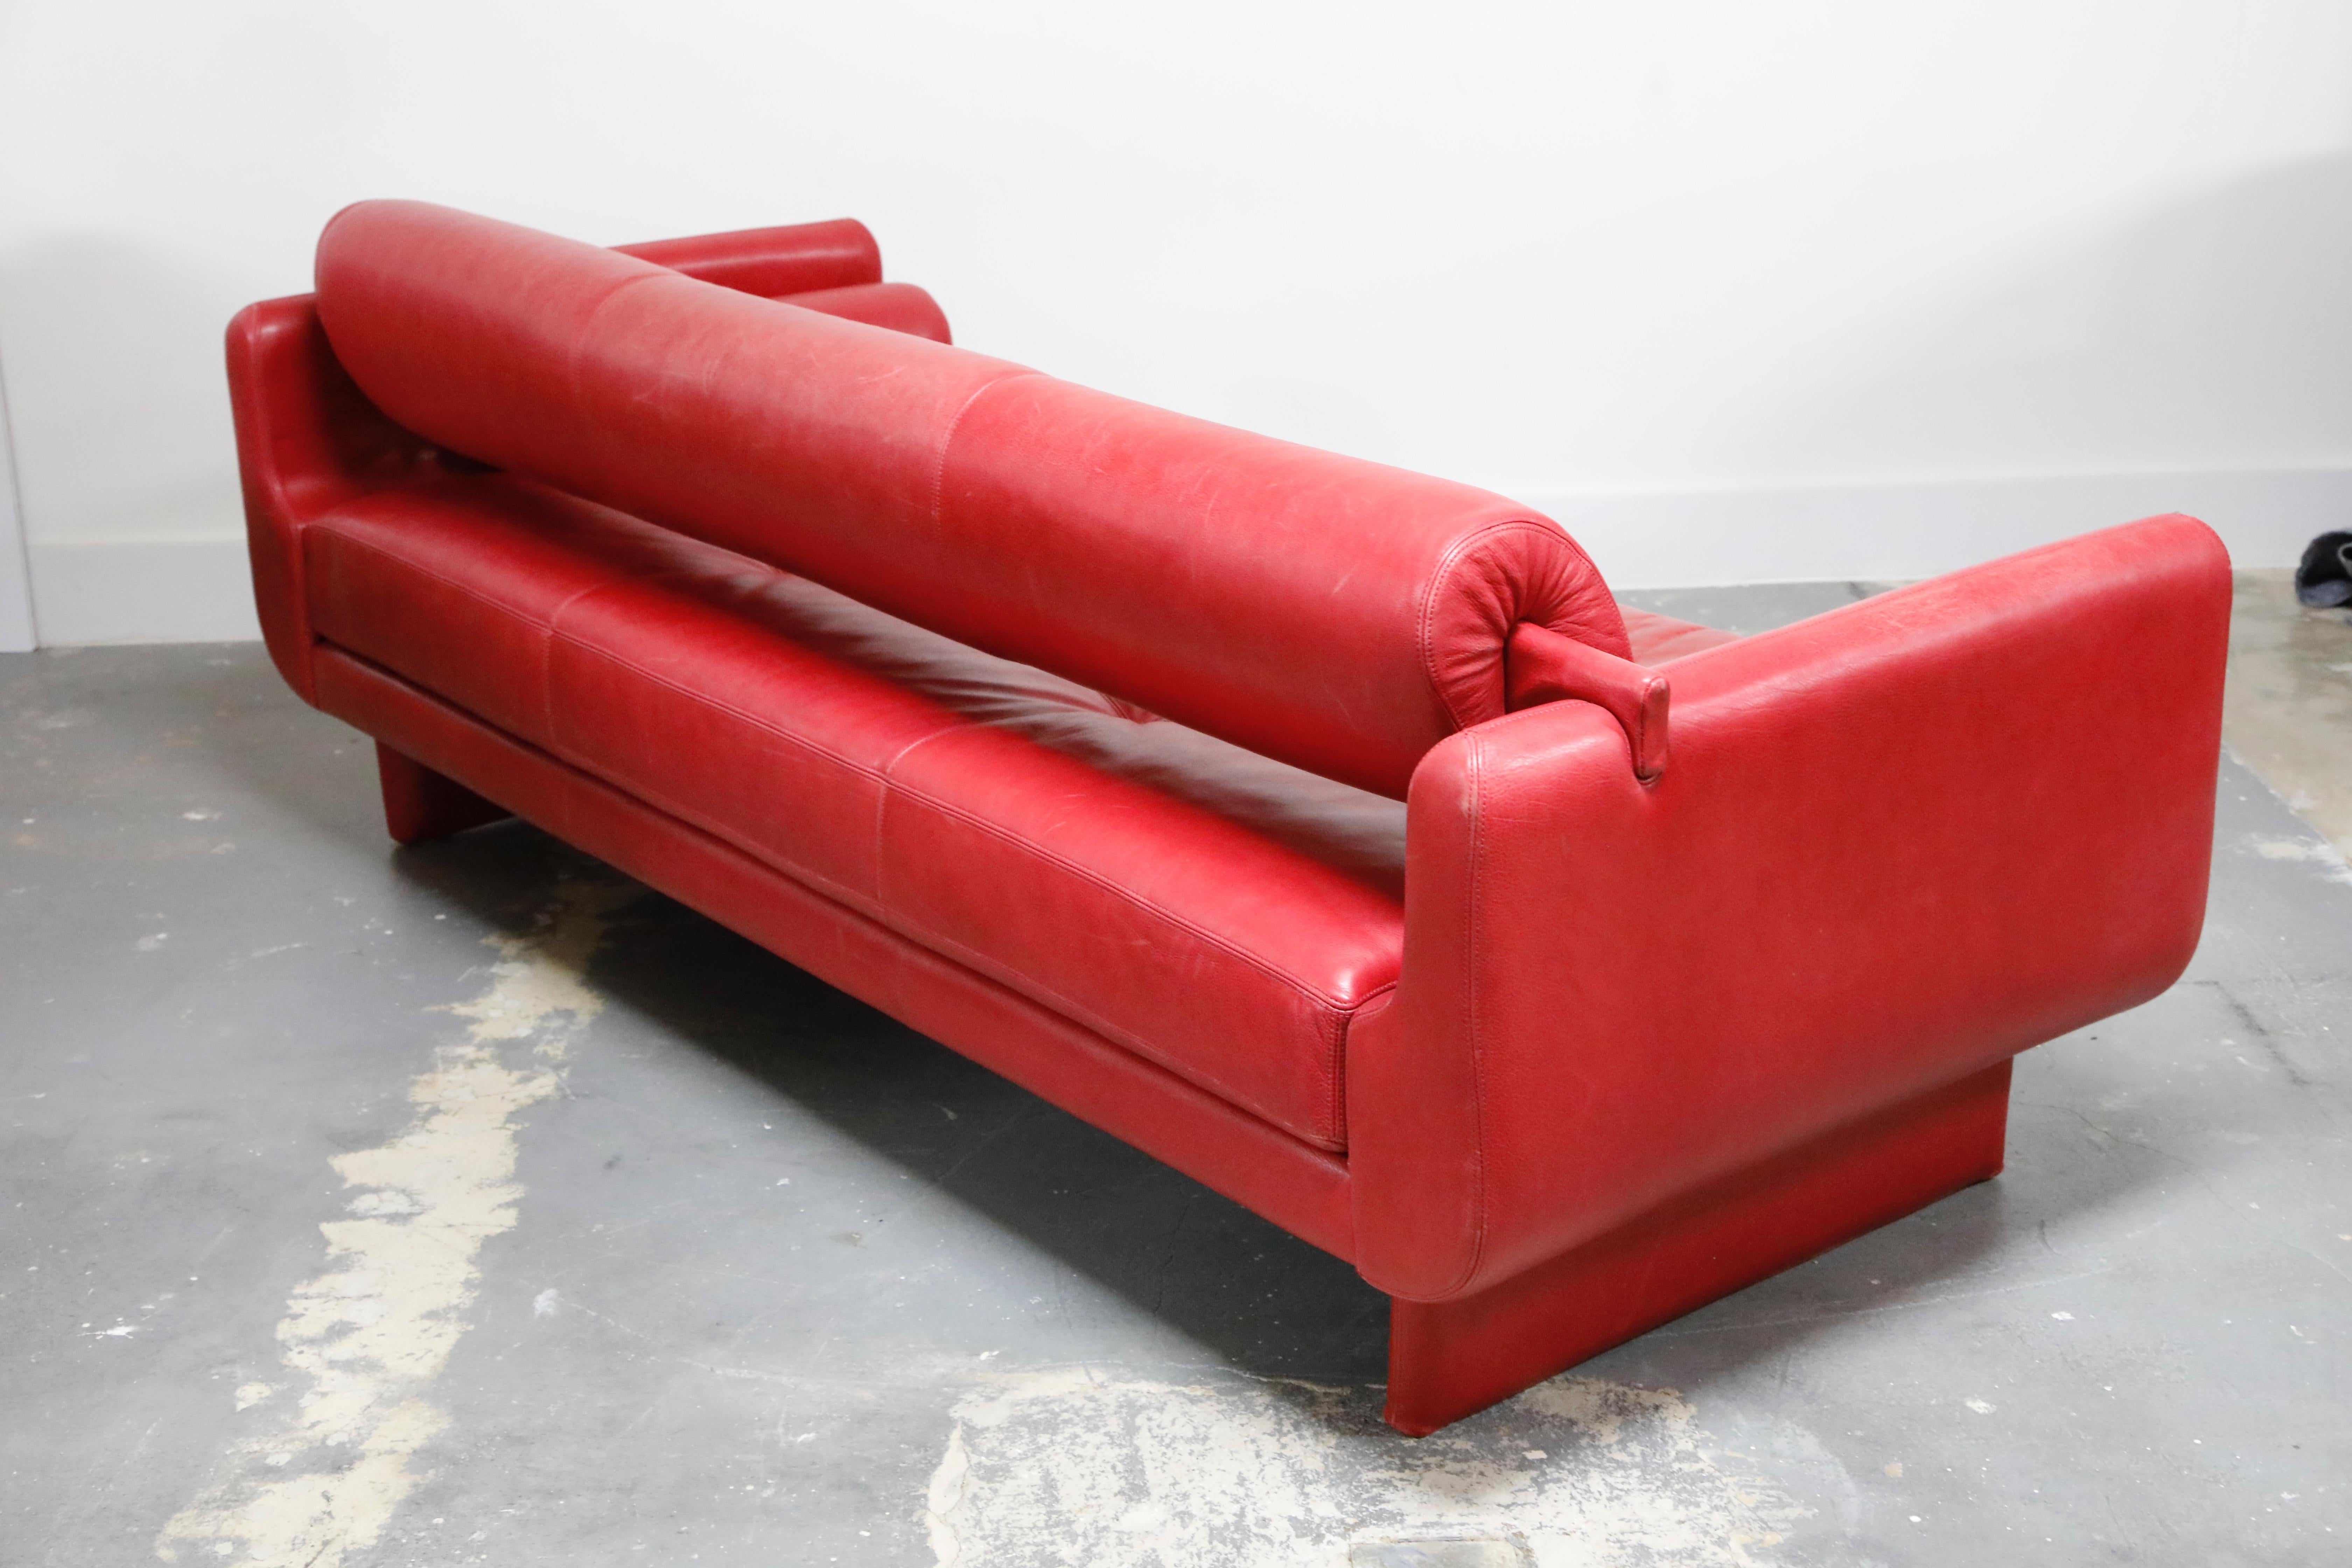 Post-Modern Vladimir Kagan for American Leather 'Matinee' Red Leather Sofa Daybed, Signed